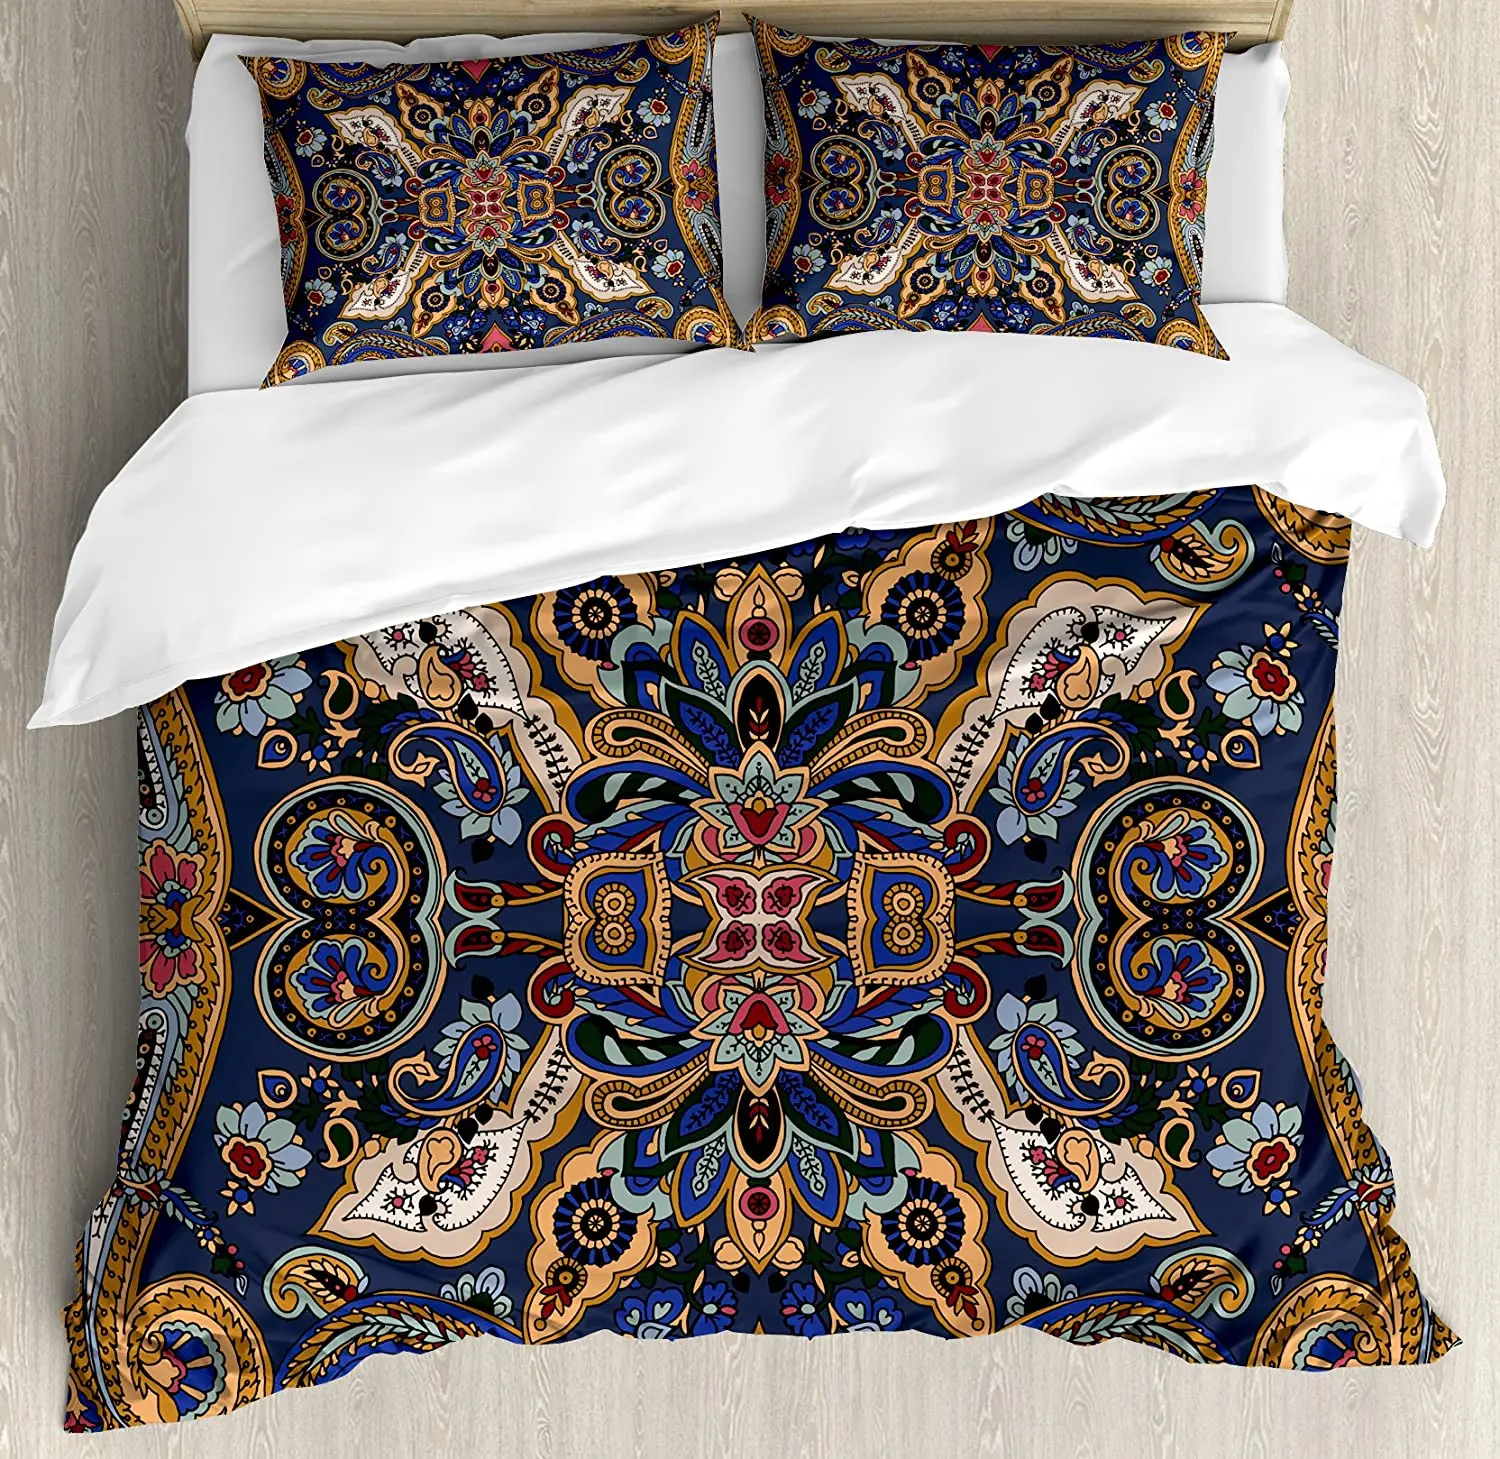 

Paisley Bedding Set For Bedroom Bed Home Historical Moroccan Florets with Slavic Effects H Duvet Cover Quilt Cover Pillowcase